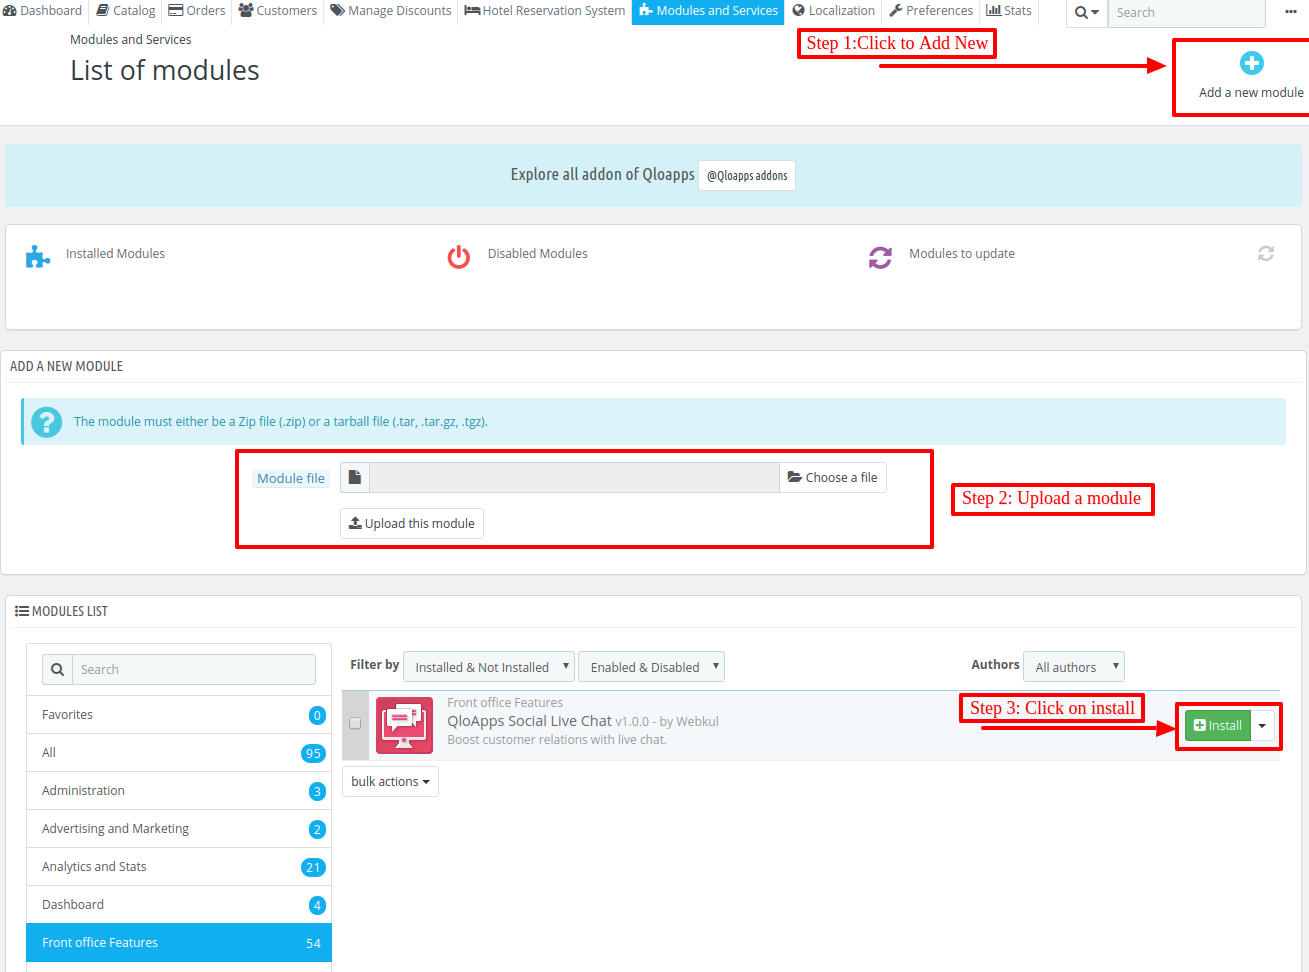 Image showing back office process of QloApps Social Live Chat upload file and install